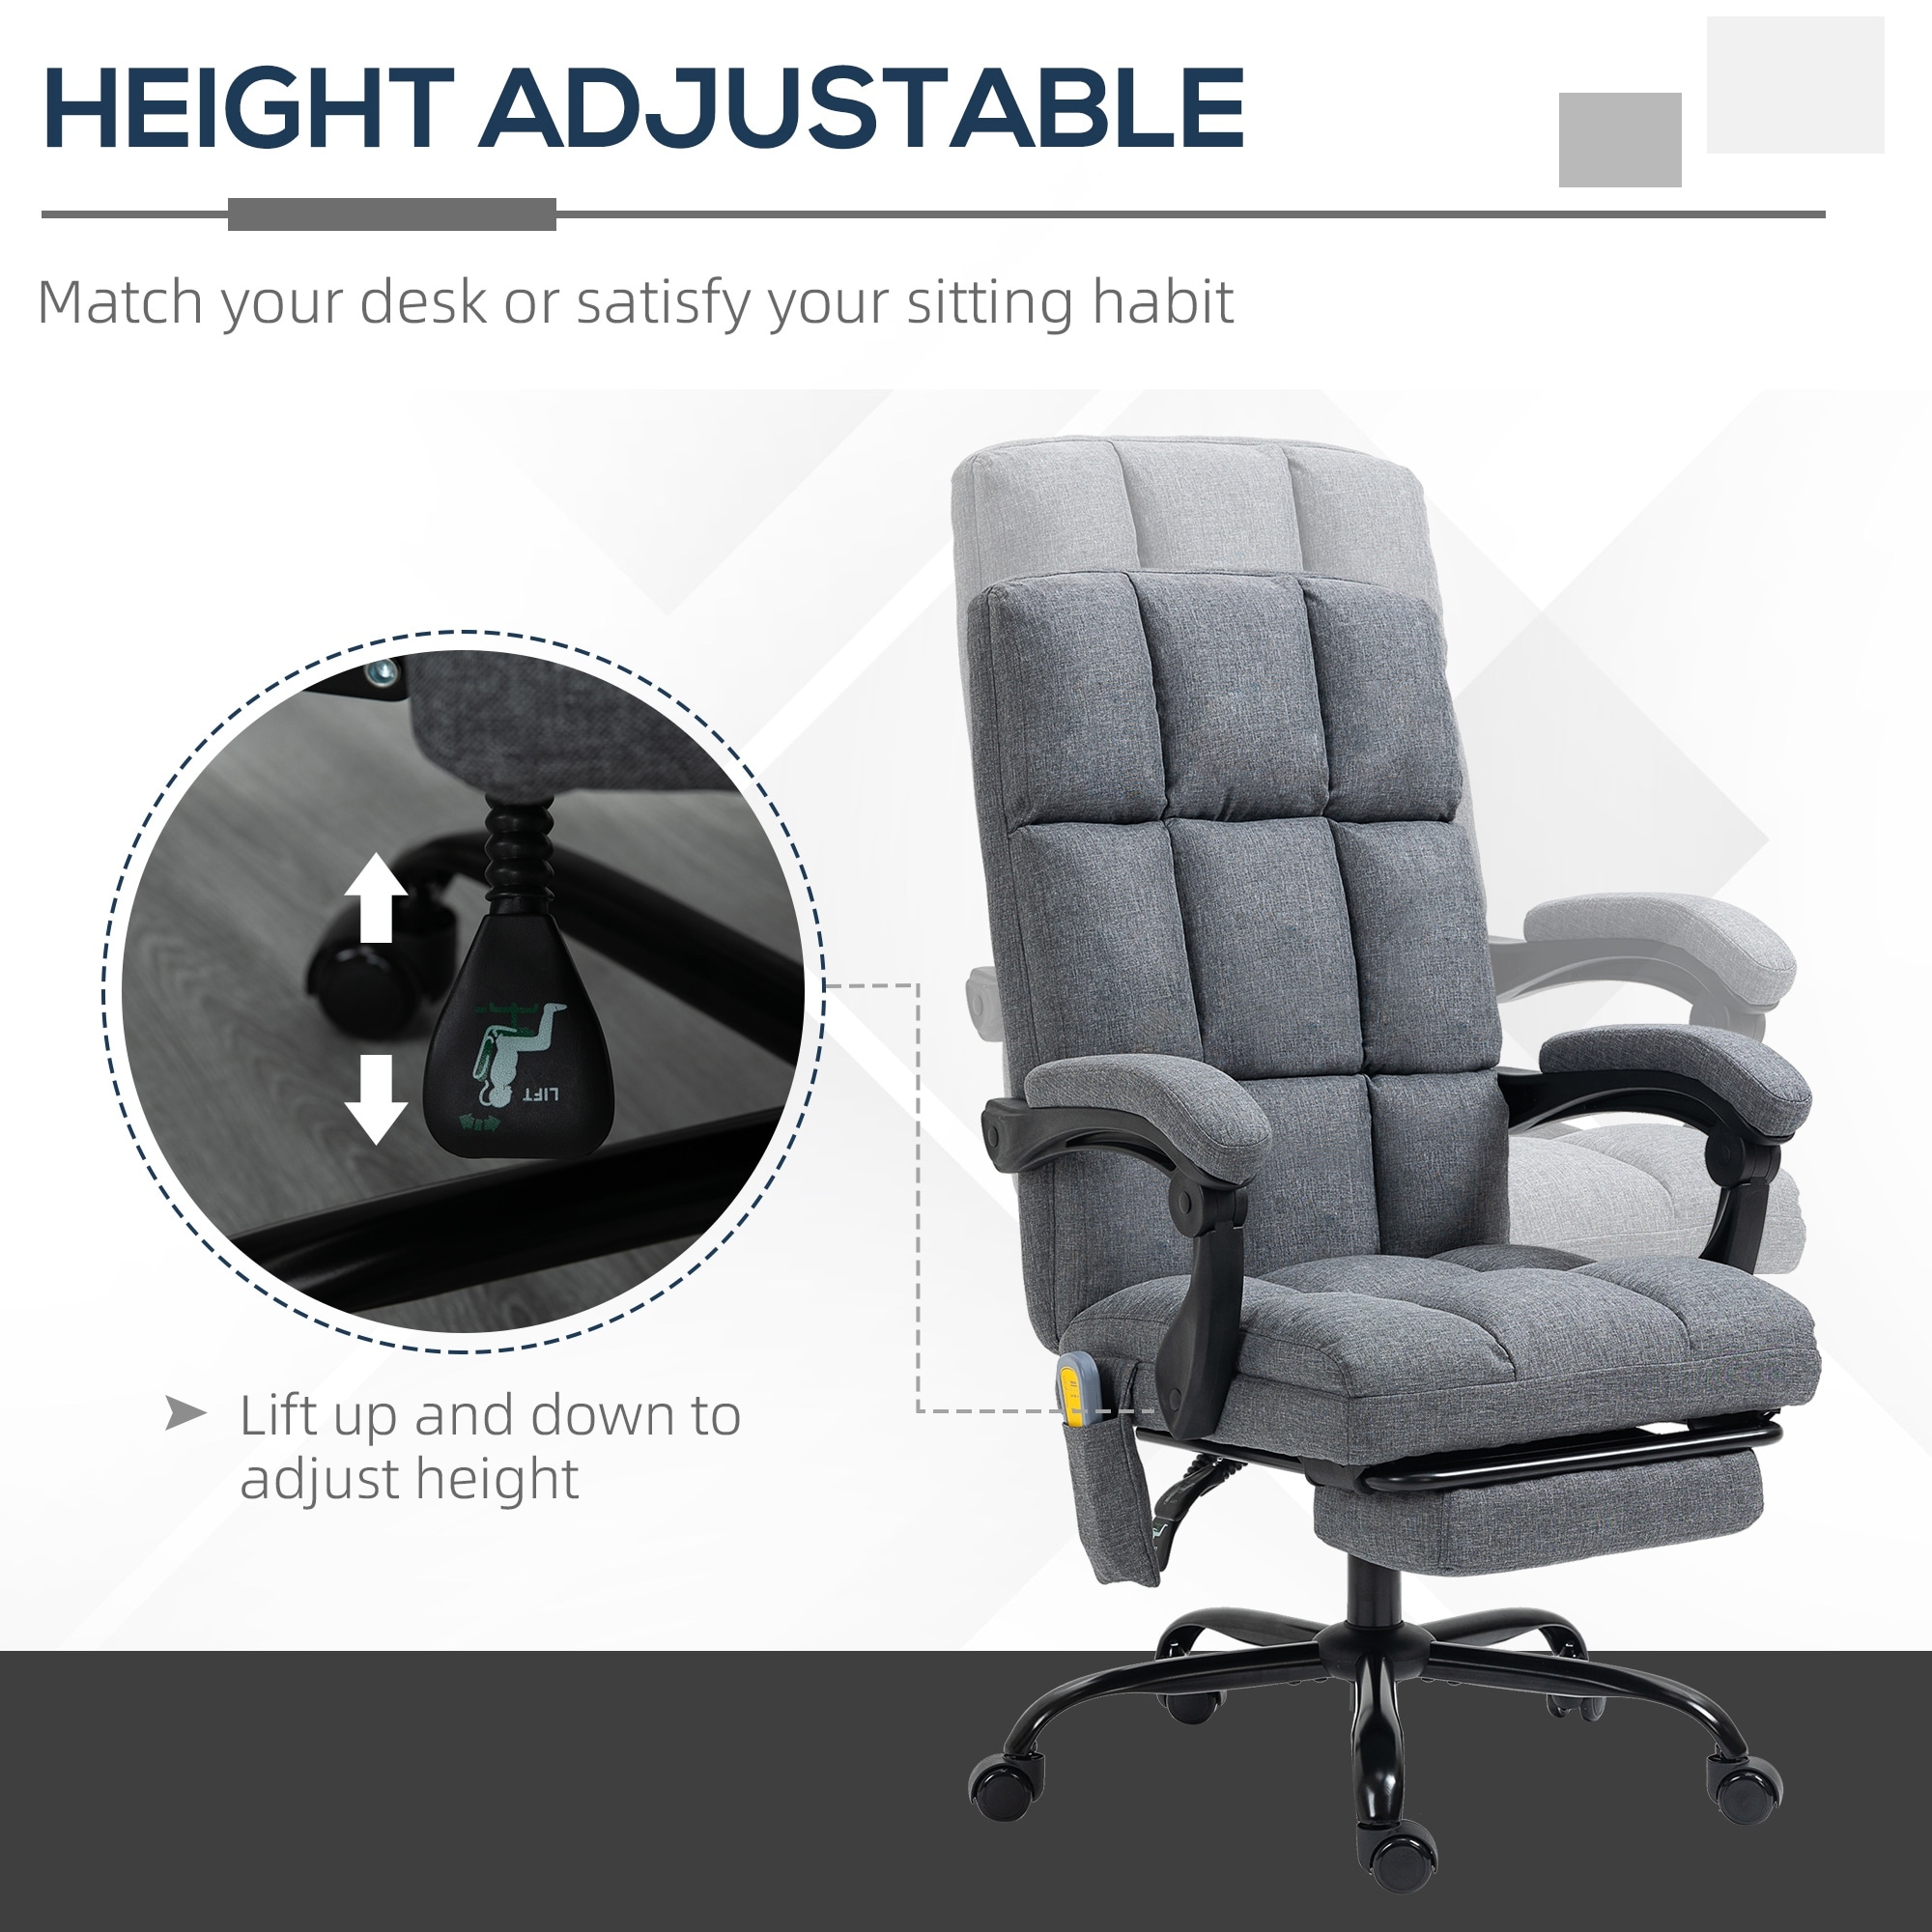 https://ak1.ostkcdn.com/images/products/is/images/direct/03fe4f1bfdced7f1a9f1711063fa4606a138be93/Vinsetto-High-Back-Vibration-Massaging-Office-Chair%2C-Reclining-Office-Chair-with-USB-Port%2C-Remote-Control-and-Footrest.jpg